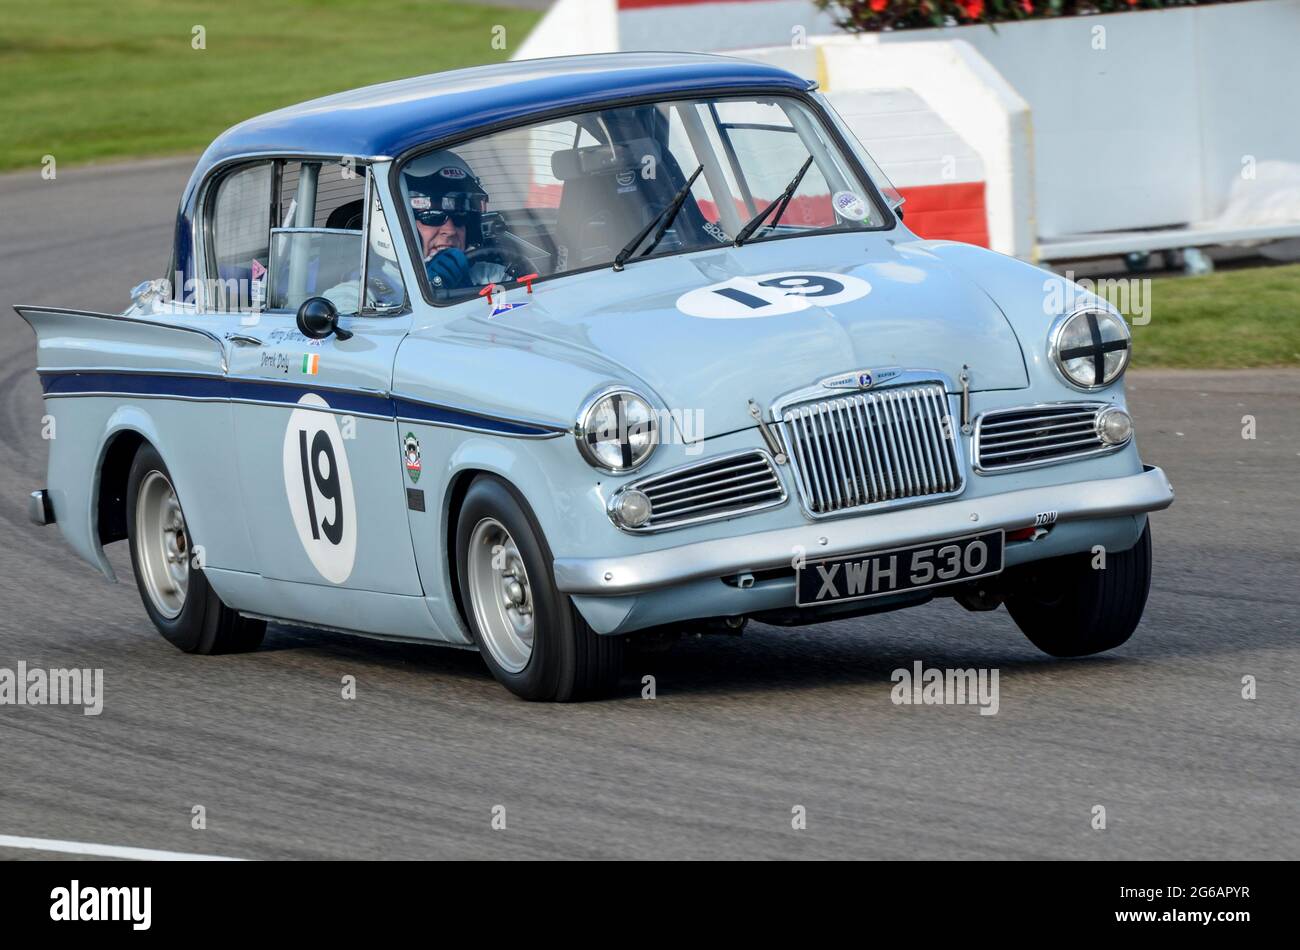 Sunbeam Rapier classic saloon, vintage racing car competing in the St Marys Trophy at the Goodwood Revival historic event, UK. Wheel up cornering Stock Photo